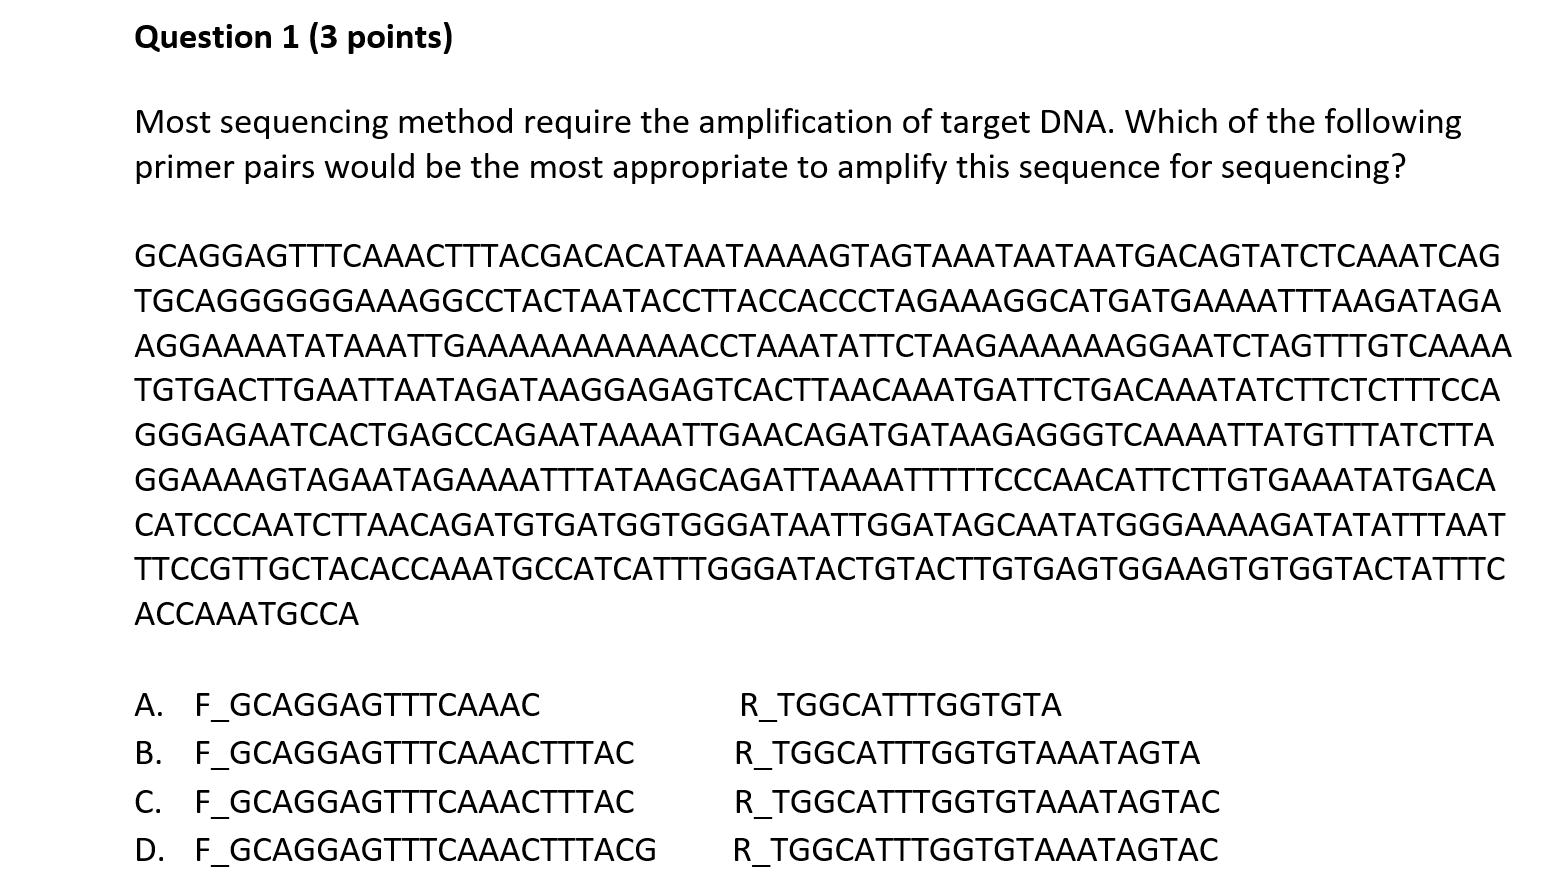 Most sequencing method require the amplification of target DNA. Which of the following primer pairs would be the most appropr